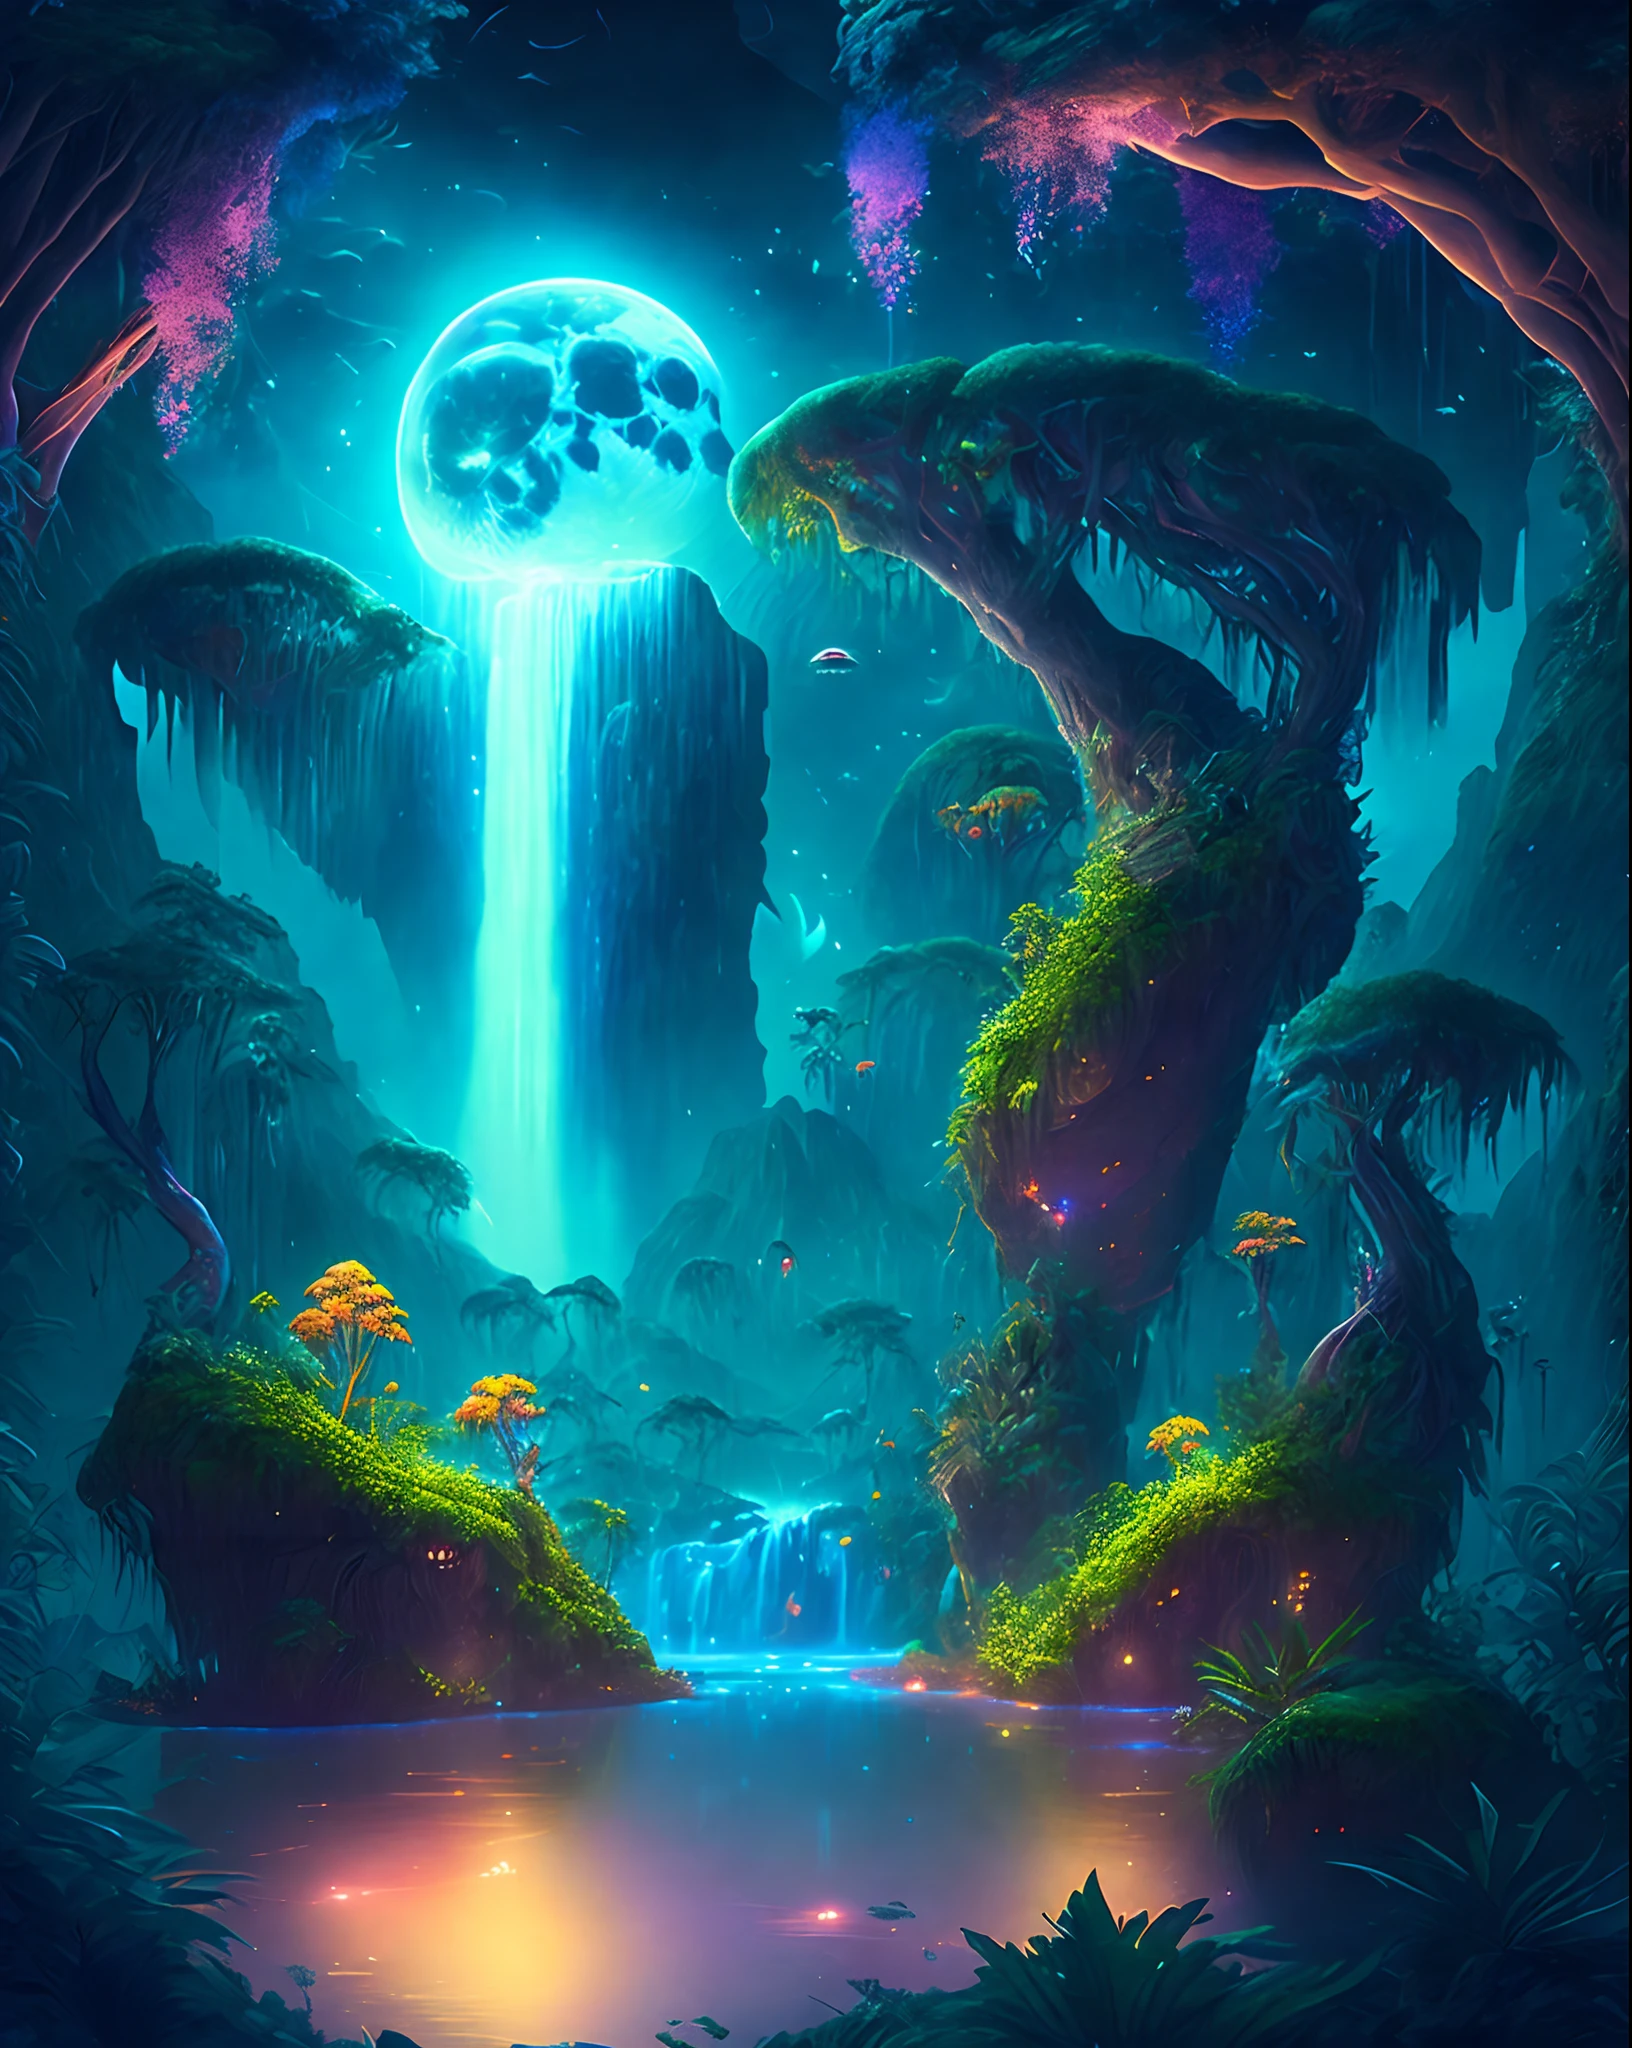 An enchanting fantasy jungle under a moonlit sky, massive floating islands covered in lush vegetation, cascading waterfalls, and illuminated creatures soaring through the night, Digital artwork